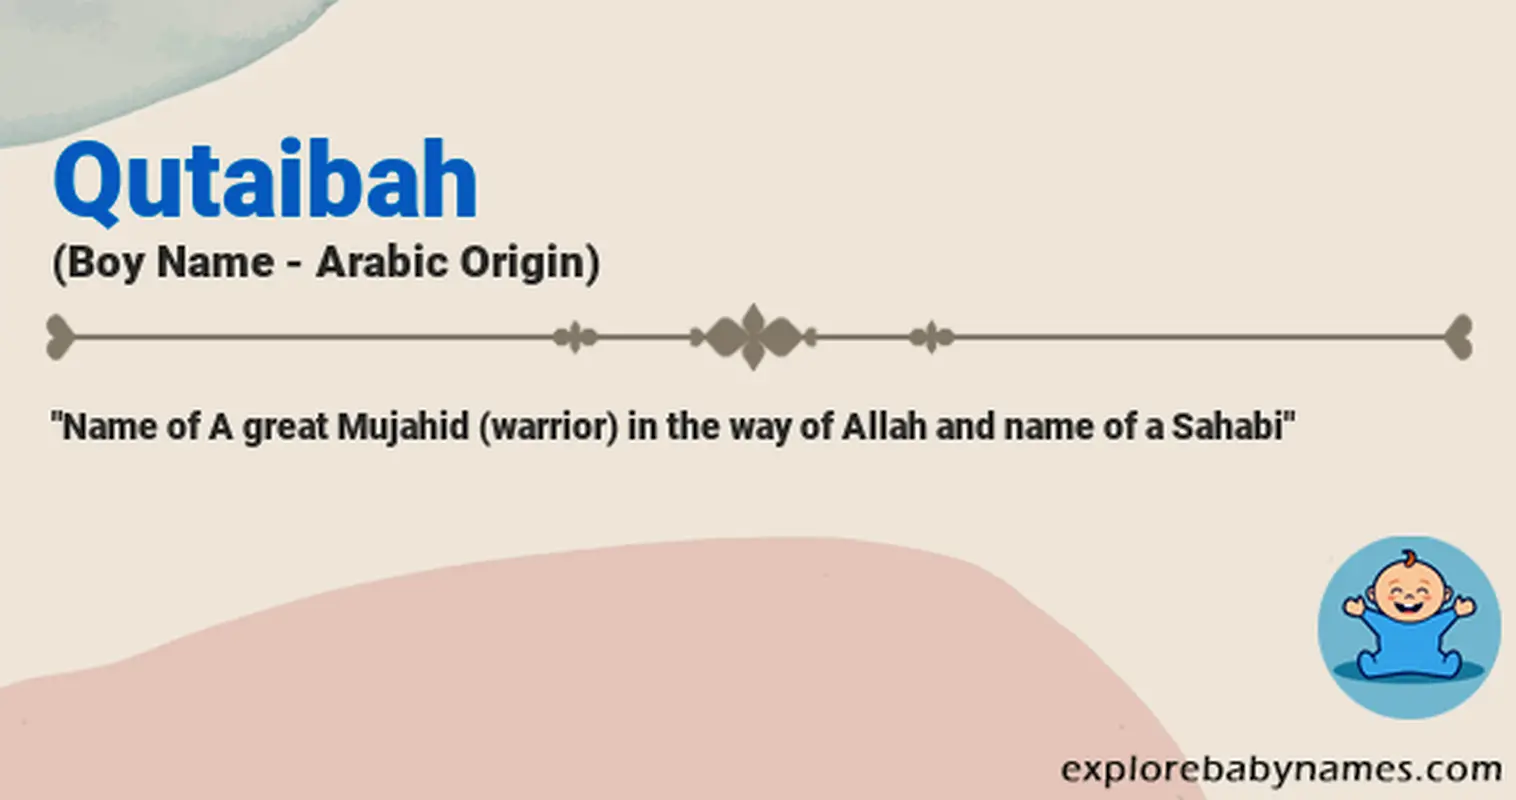 Meaning of Qutaibah